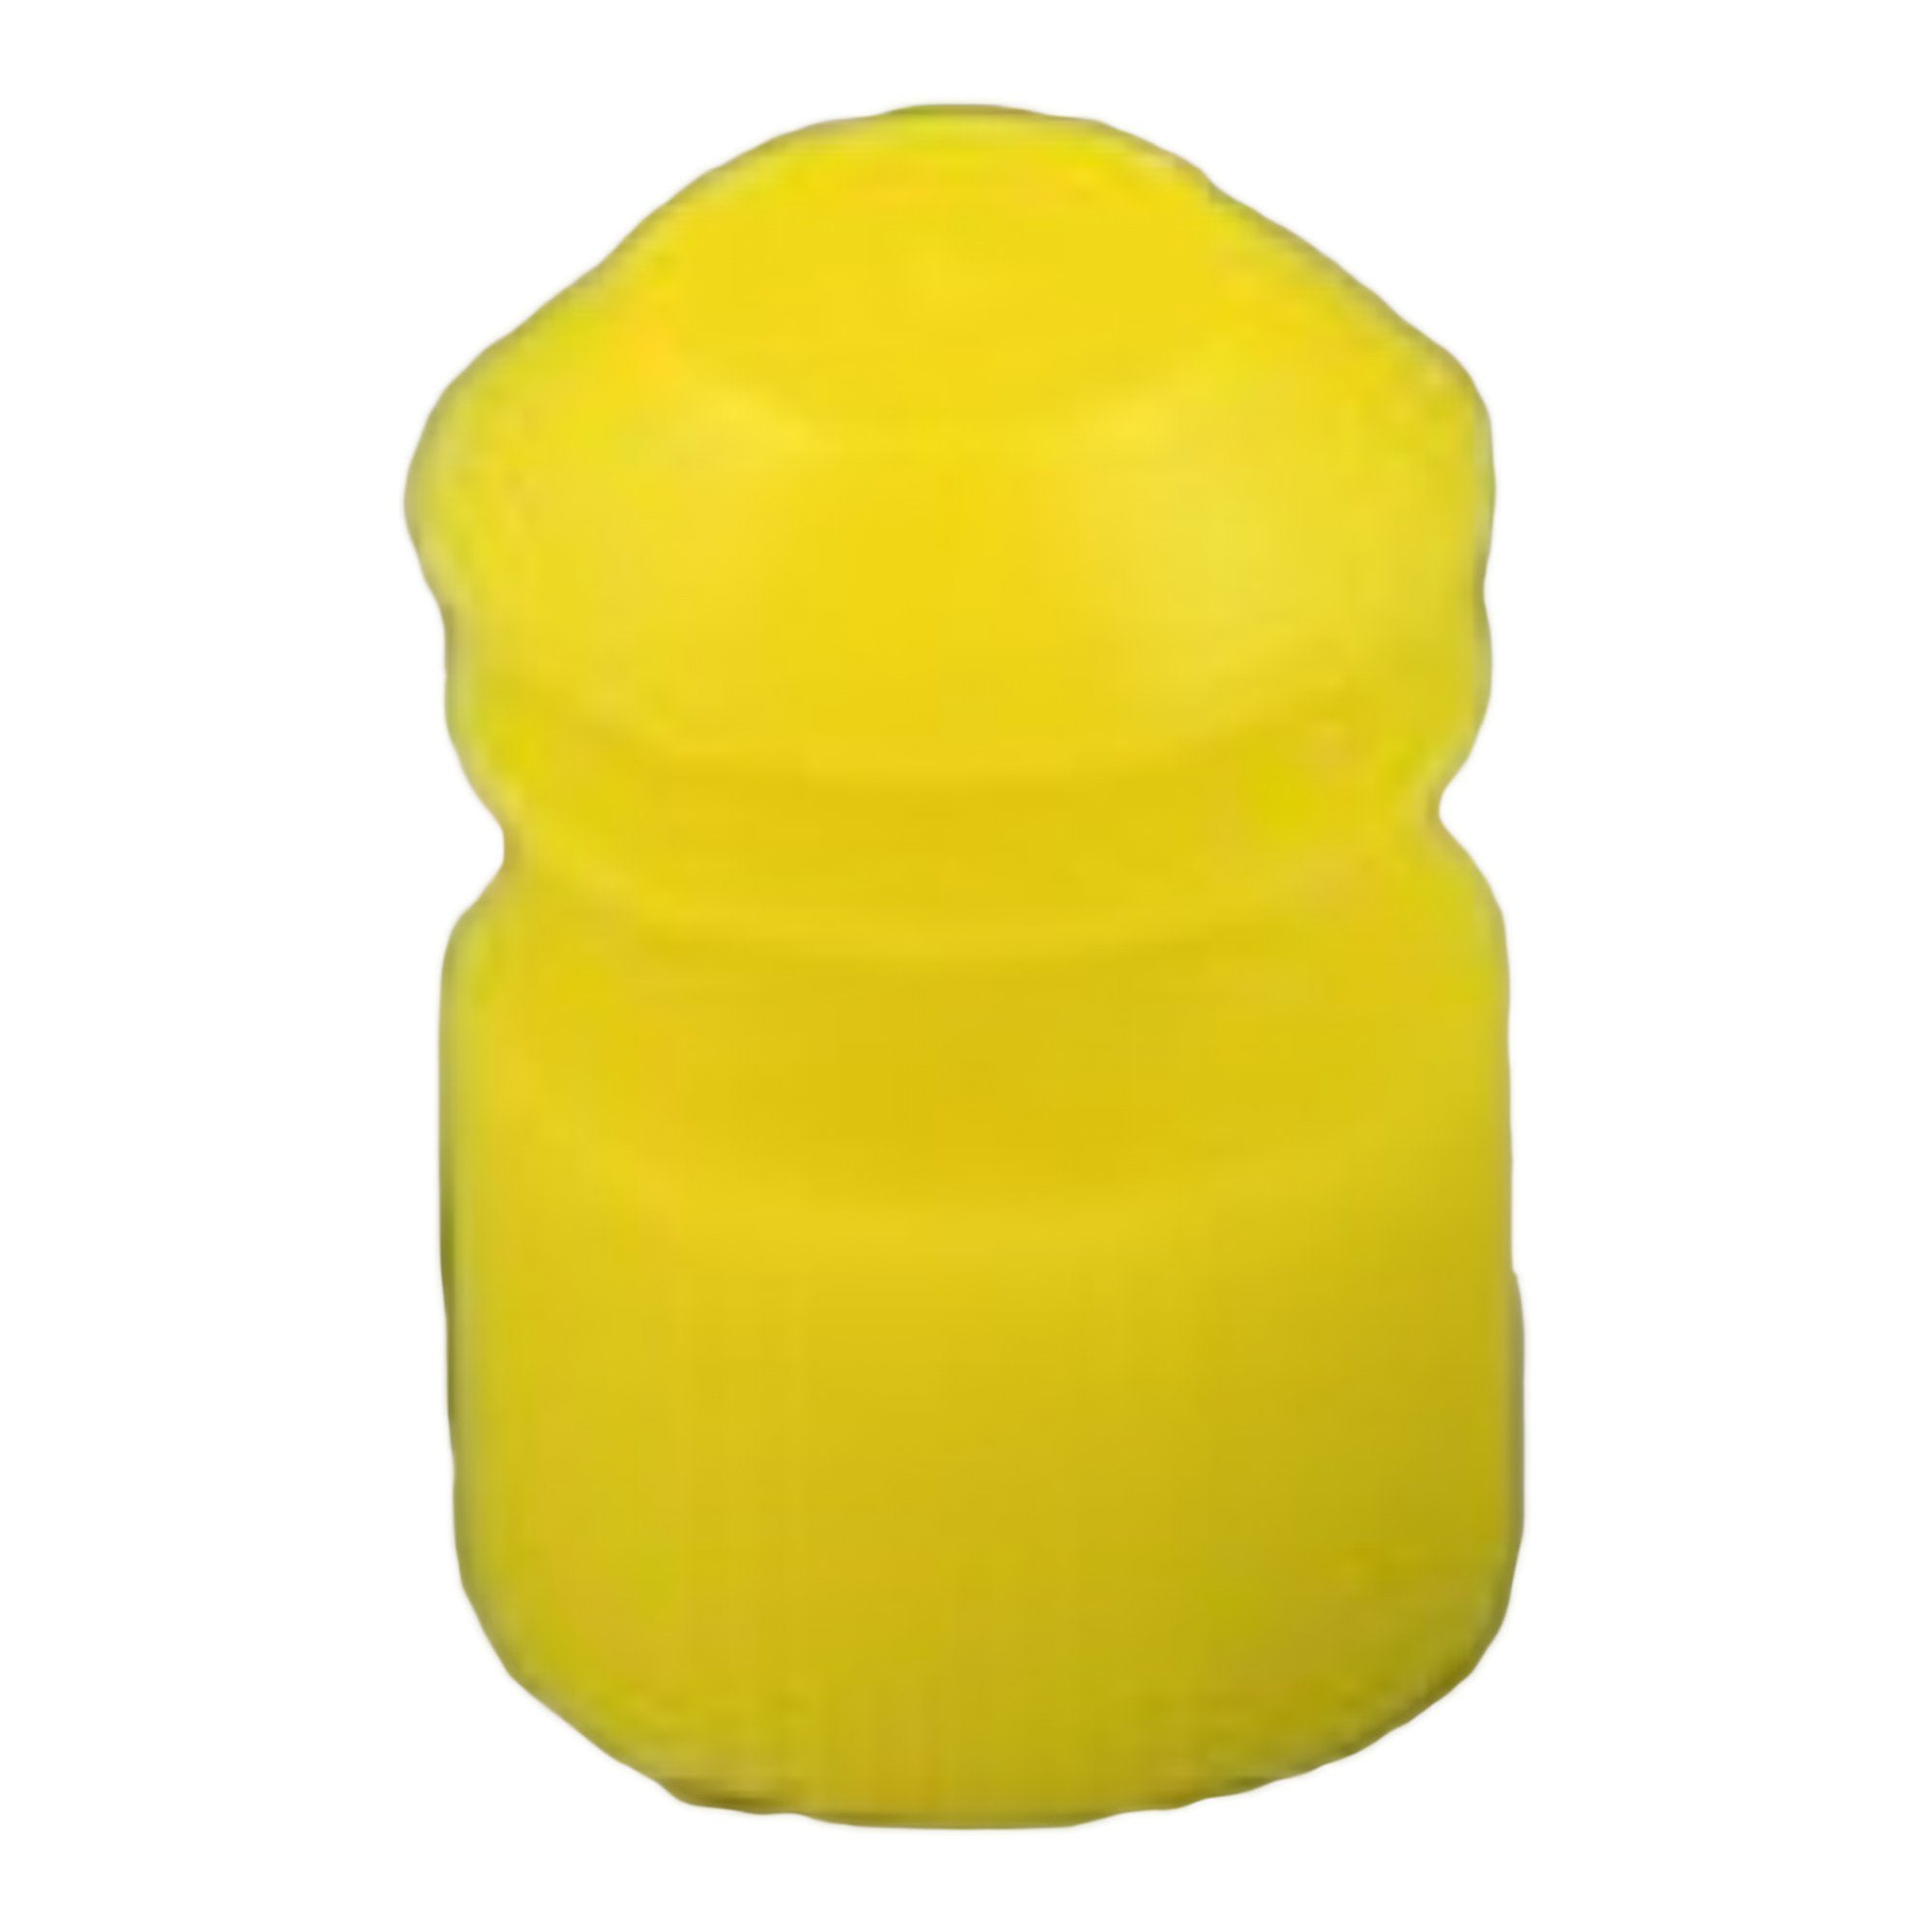 McKesson Tube Closure Polyethylene Flanged Plug Cap Yellow 13 mm For Use with 13 mm Blood Drawing Tubes, Glass Test Tubes, Plastic Culture Tubes NonSterile